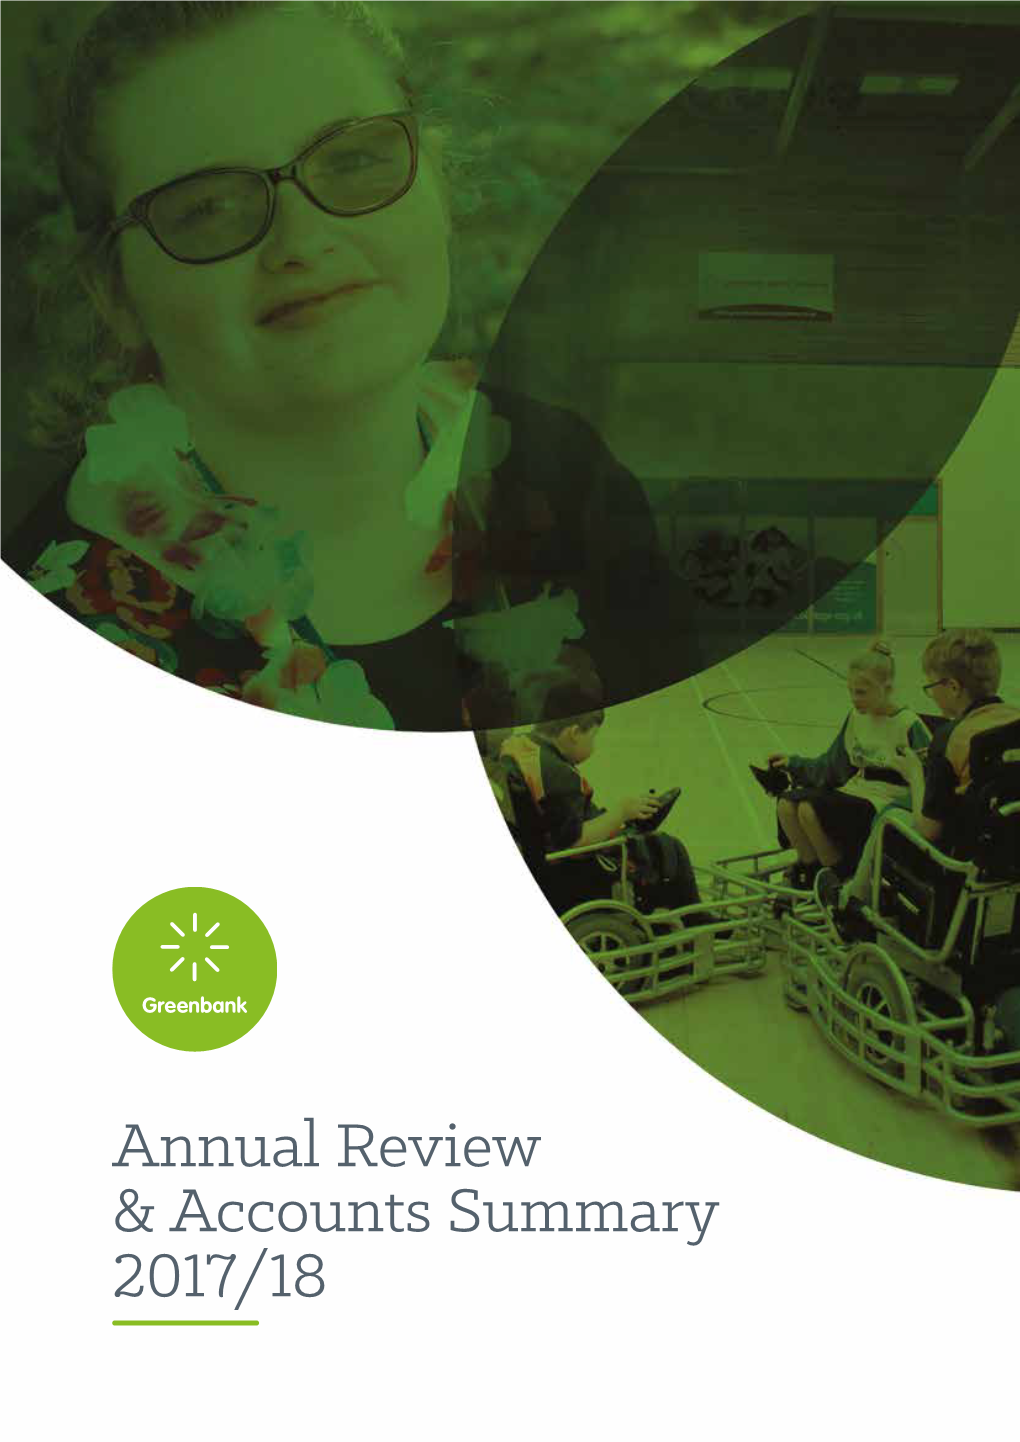 Annual Review & Accounts Summary 2017/18